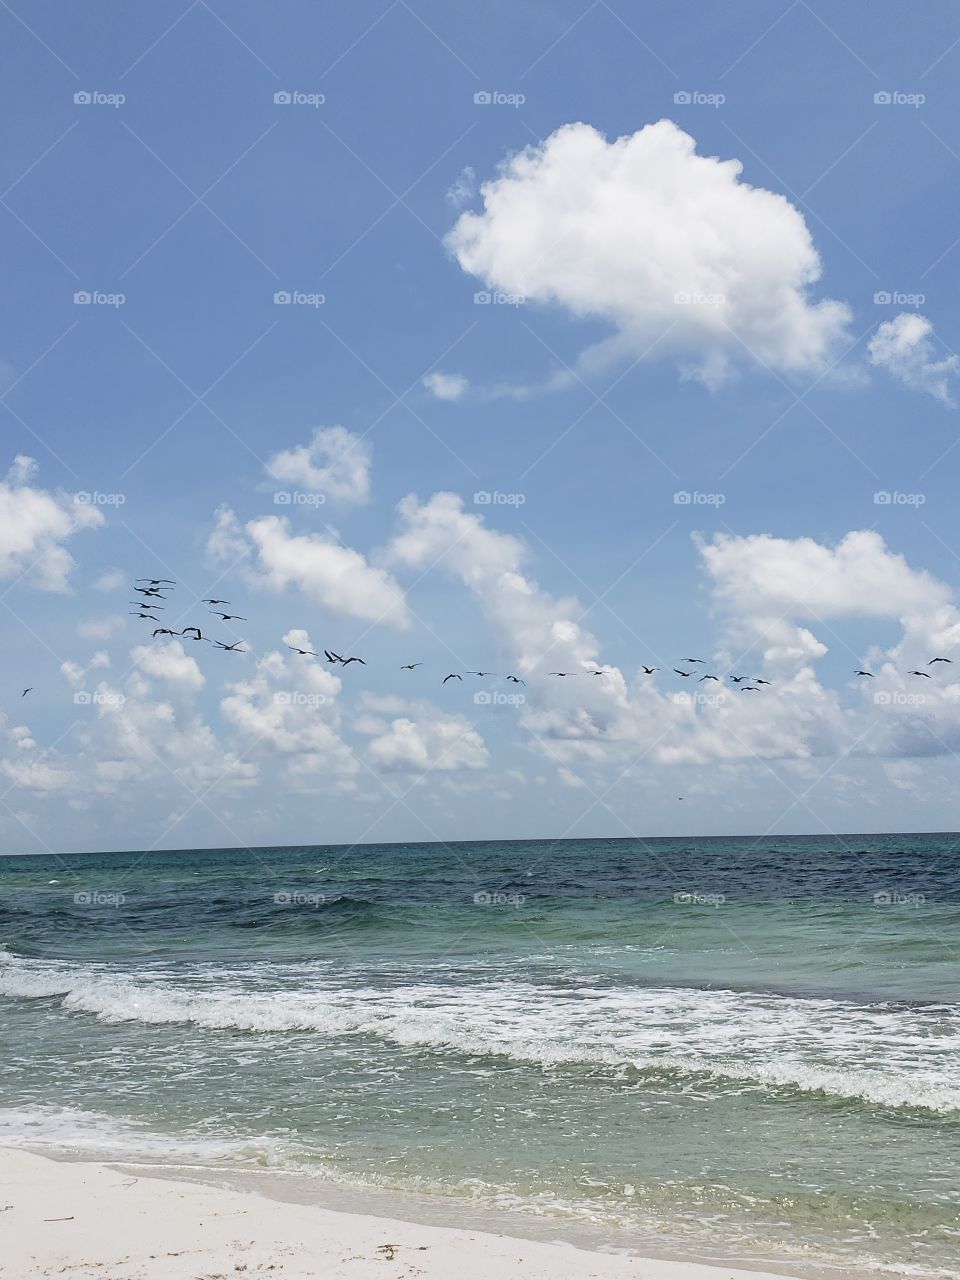 Pelicans over the Gulf of Mexico